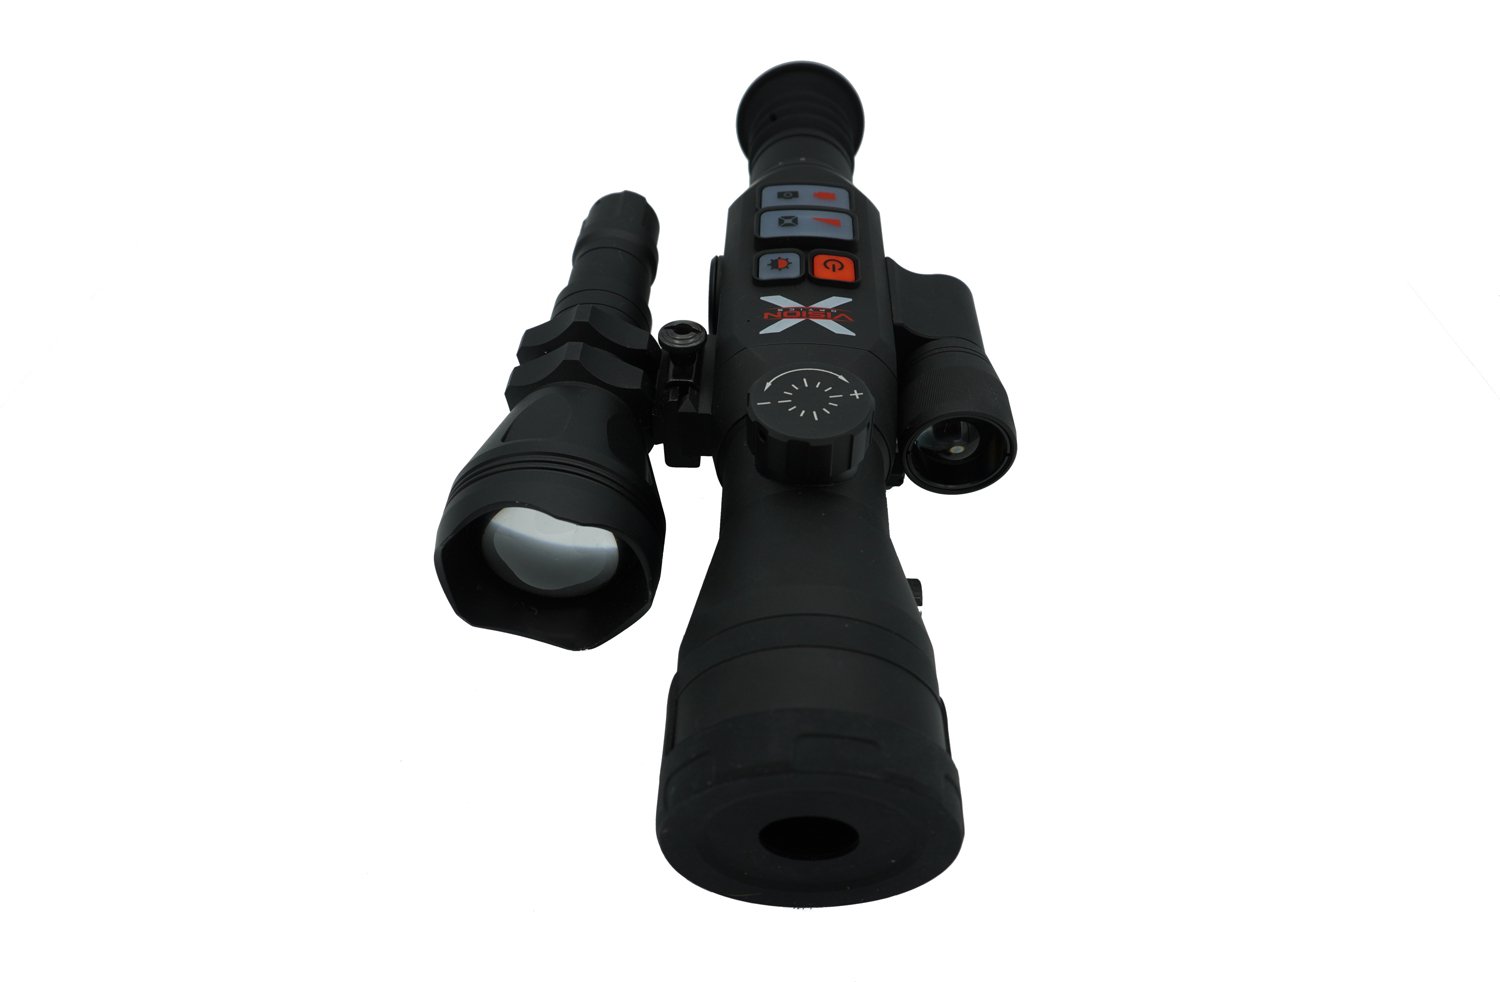 Belomo 3X78 night vision scope - A+ Thrift Shop for Education